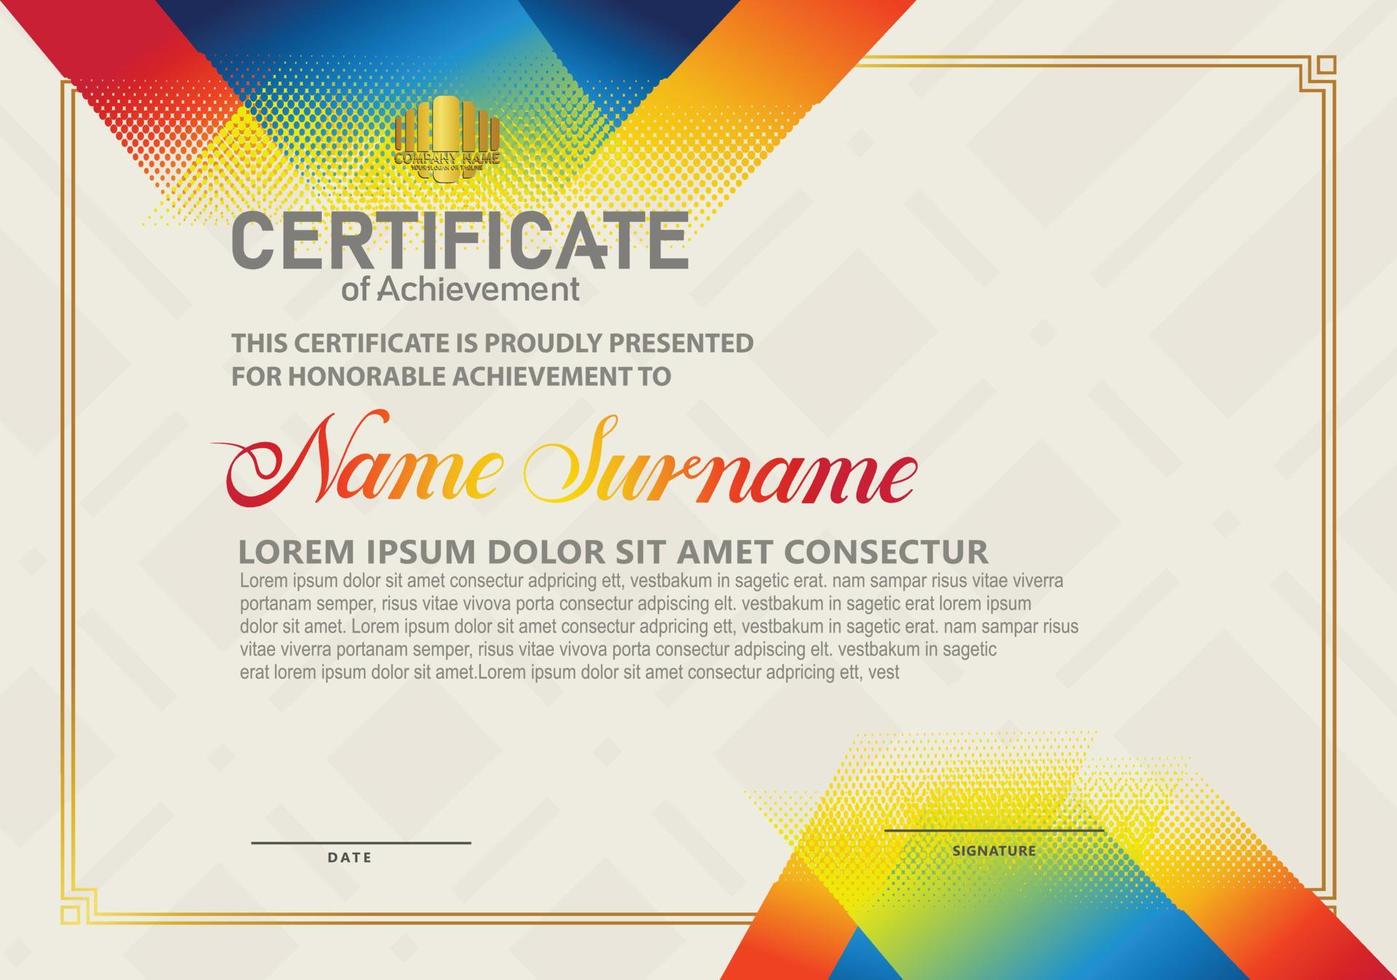 Modern certificate template with diagonal halftone ornament on background. vector illustration